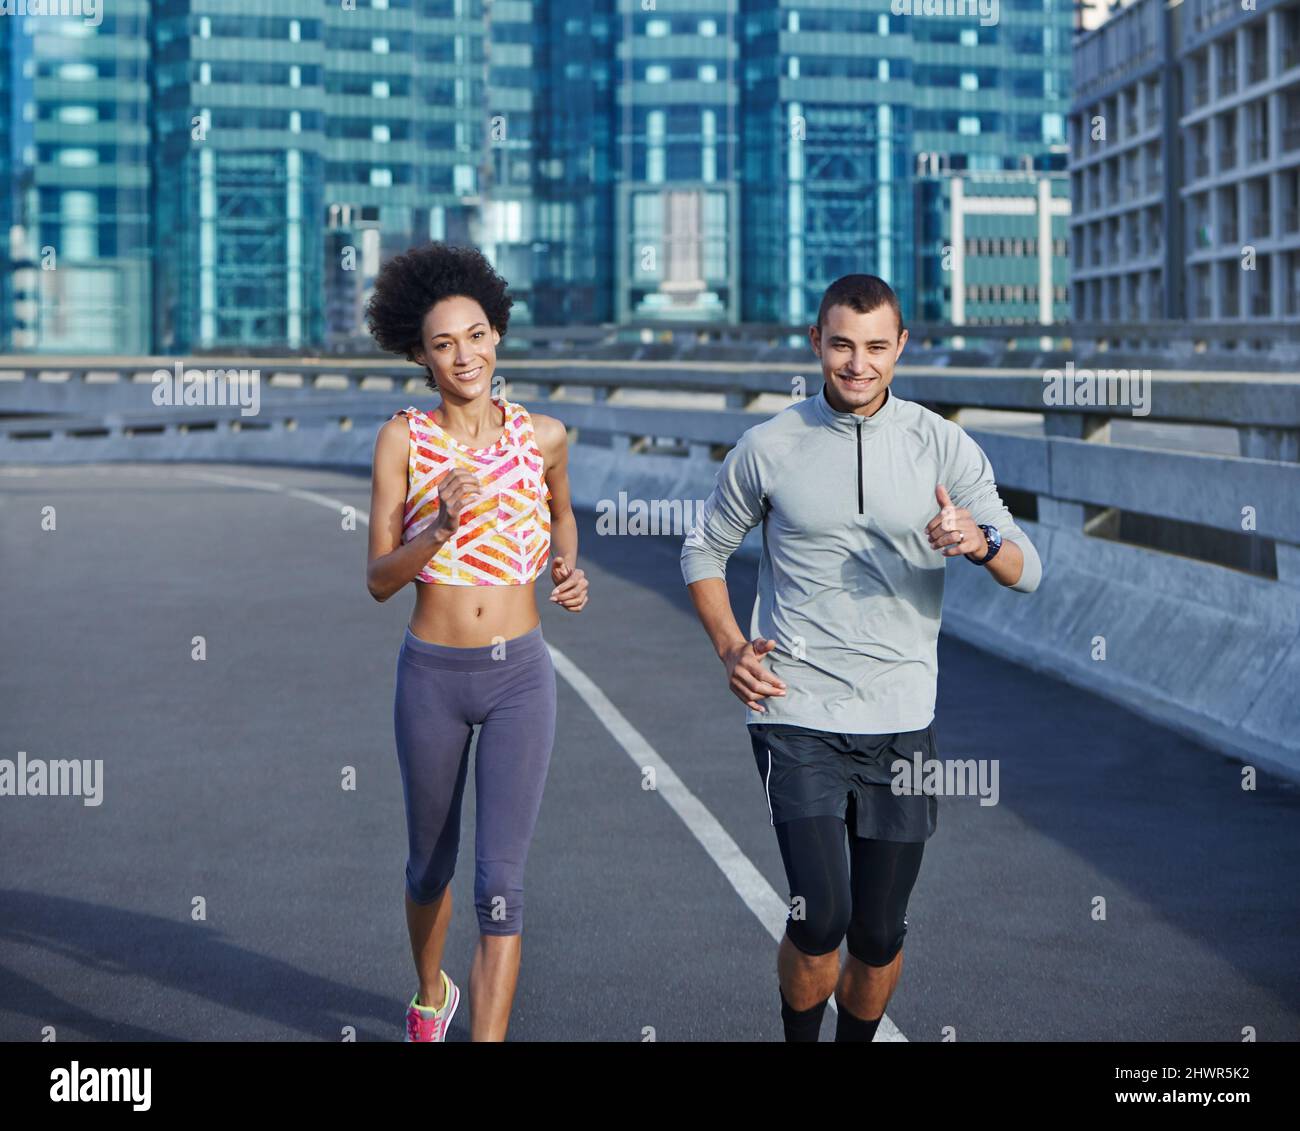 We love a bit of competition. Shot of two friends jogging together through the city streets. Stock Photo